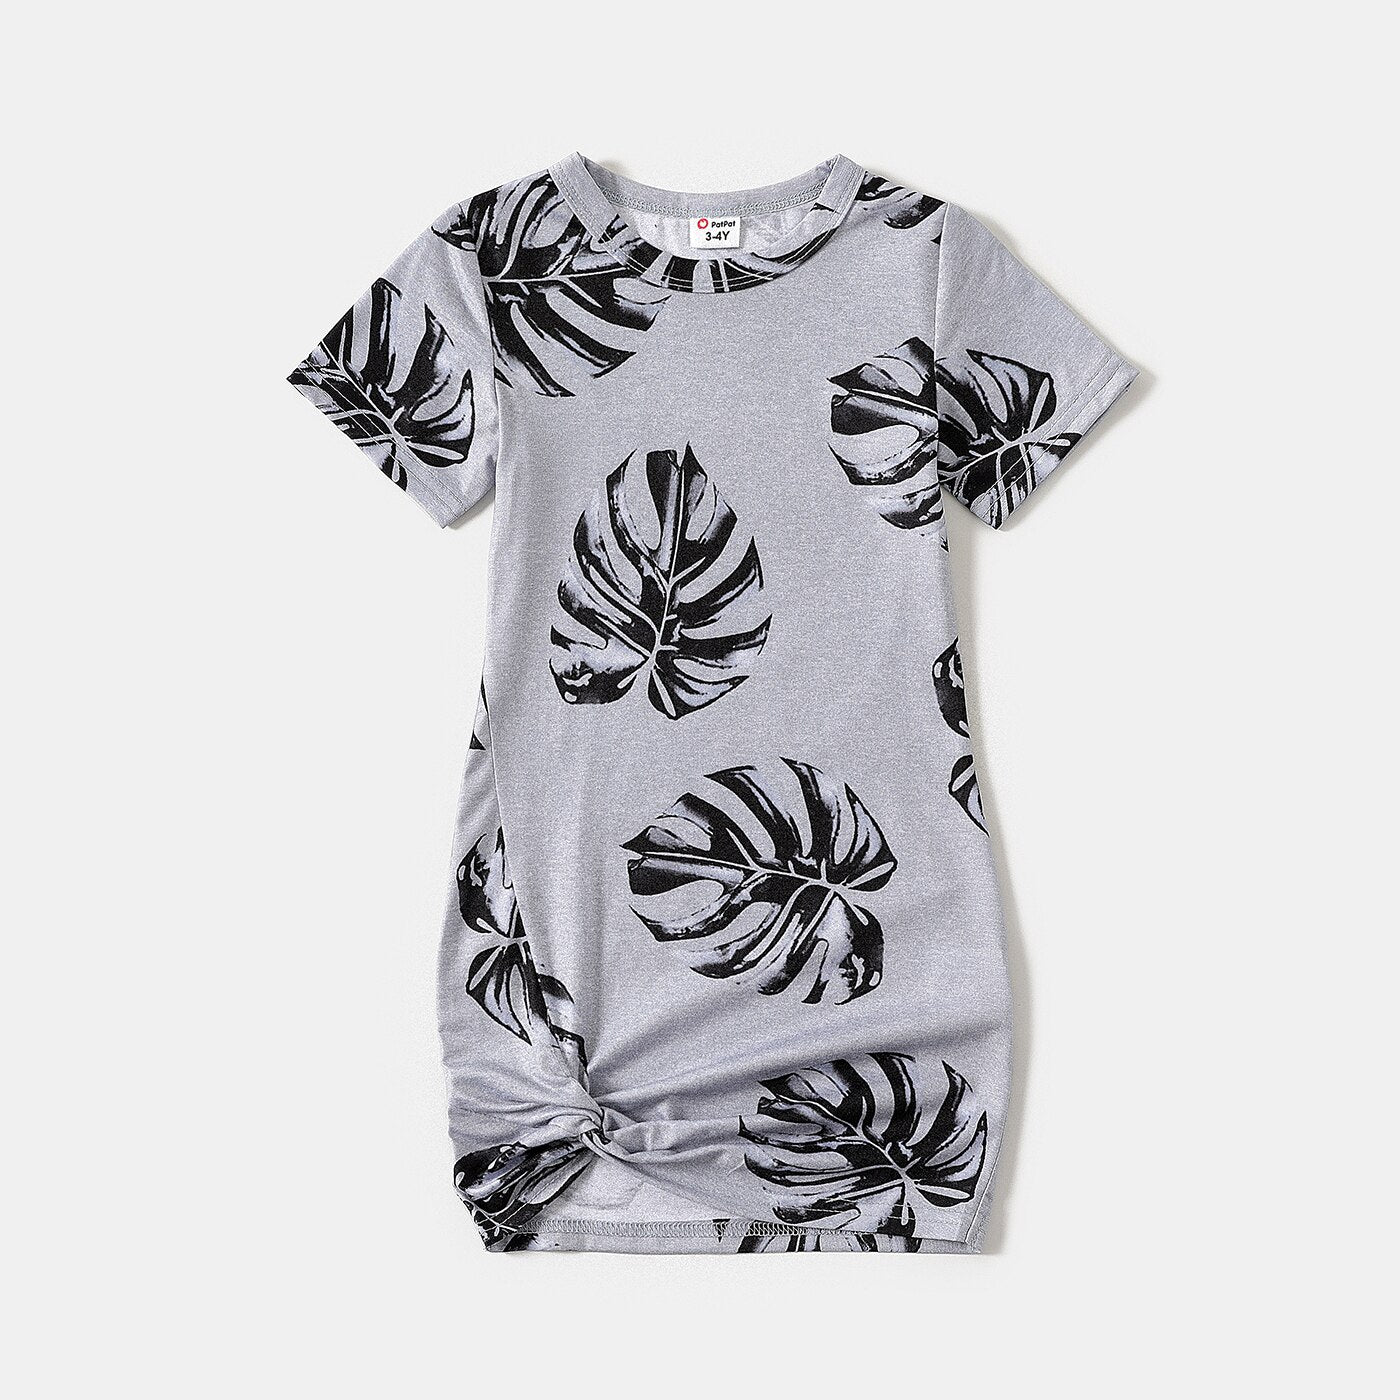 Family Matching Dress Palm Leaf Print Short-sleeve Twist Knot Bodycon Dress for Mommy and Me - ChildAngle